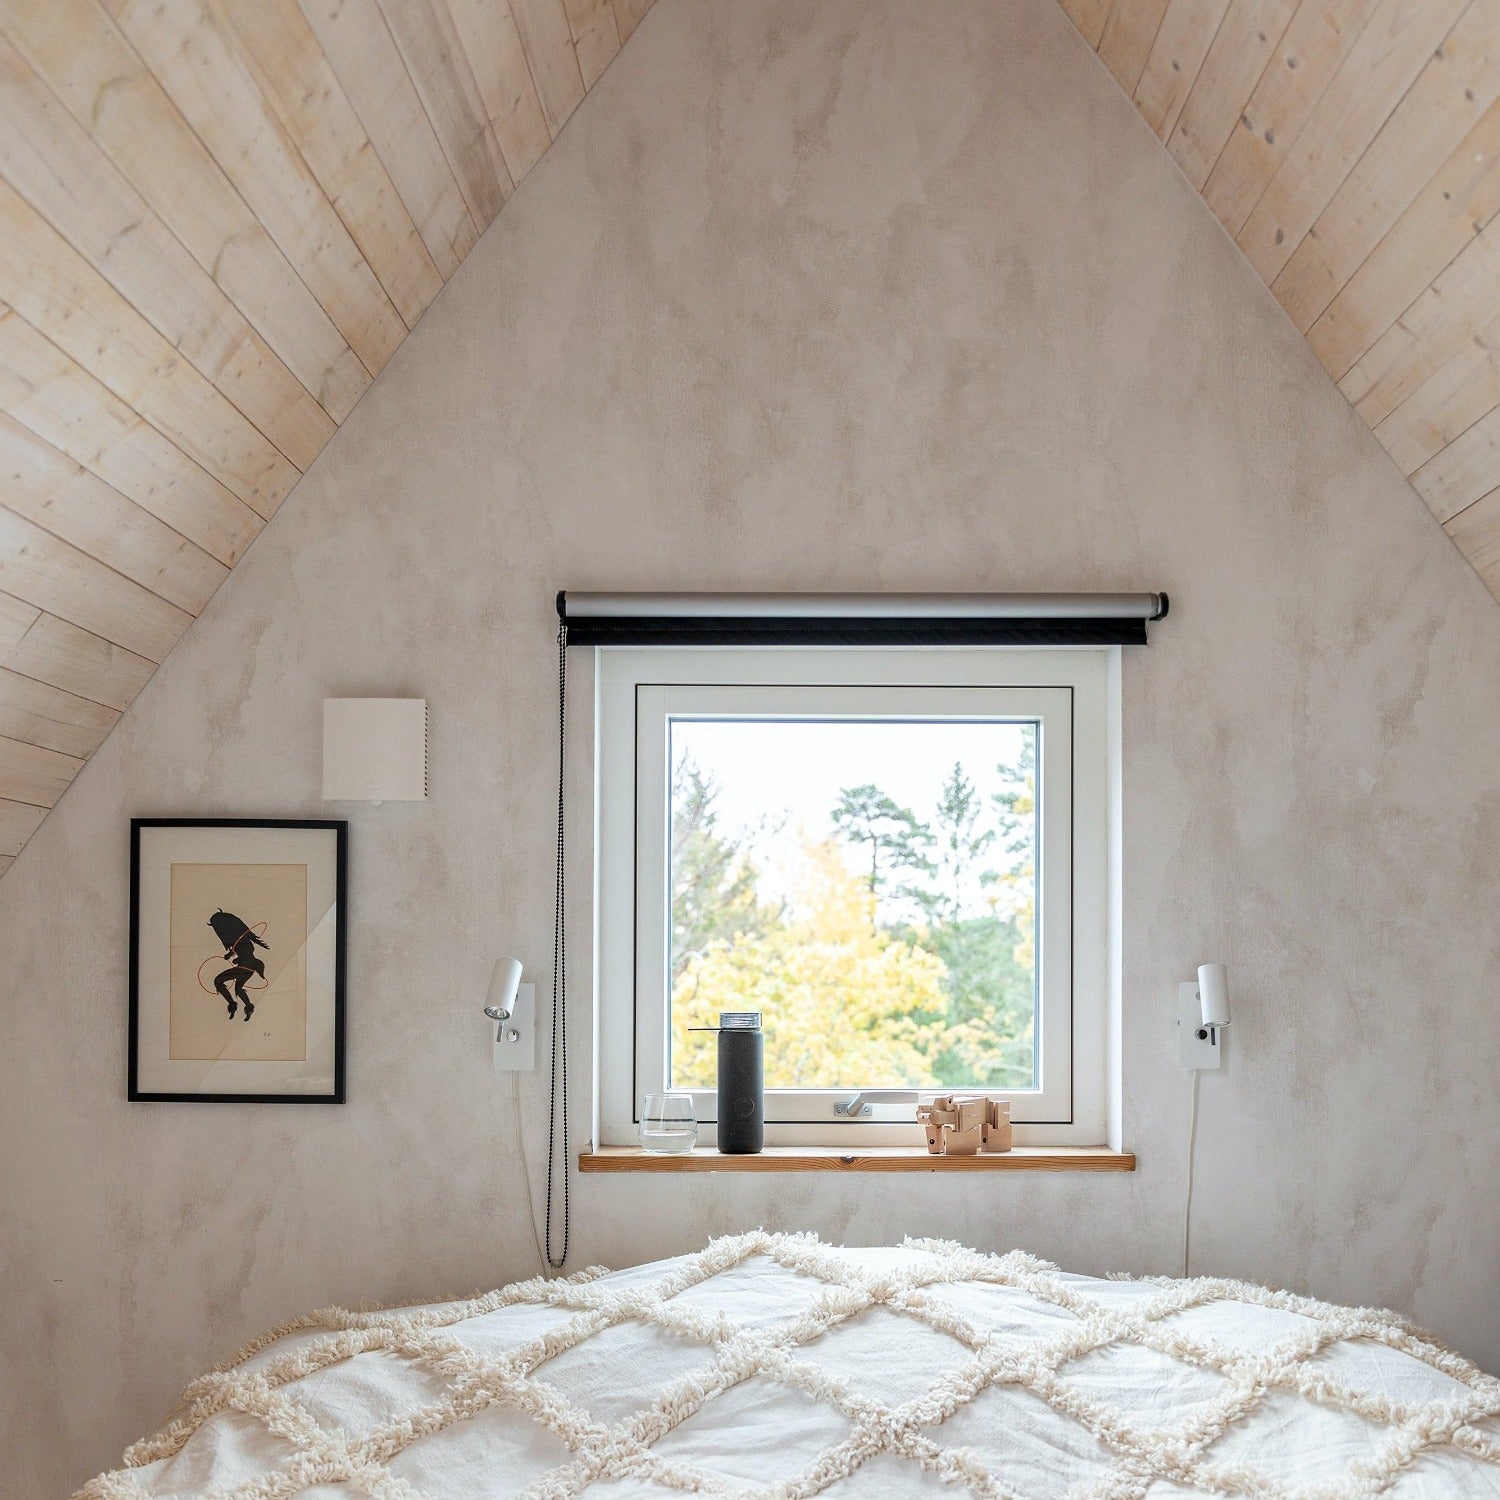 A tranquil attic bedroom adorned with the Neutral Limewash Wallpaper, providing a calming, plaster-like effect that enhances the cozy atmosphere, complemented by a large window inviting in natural light